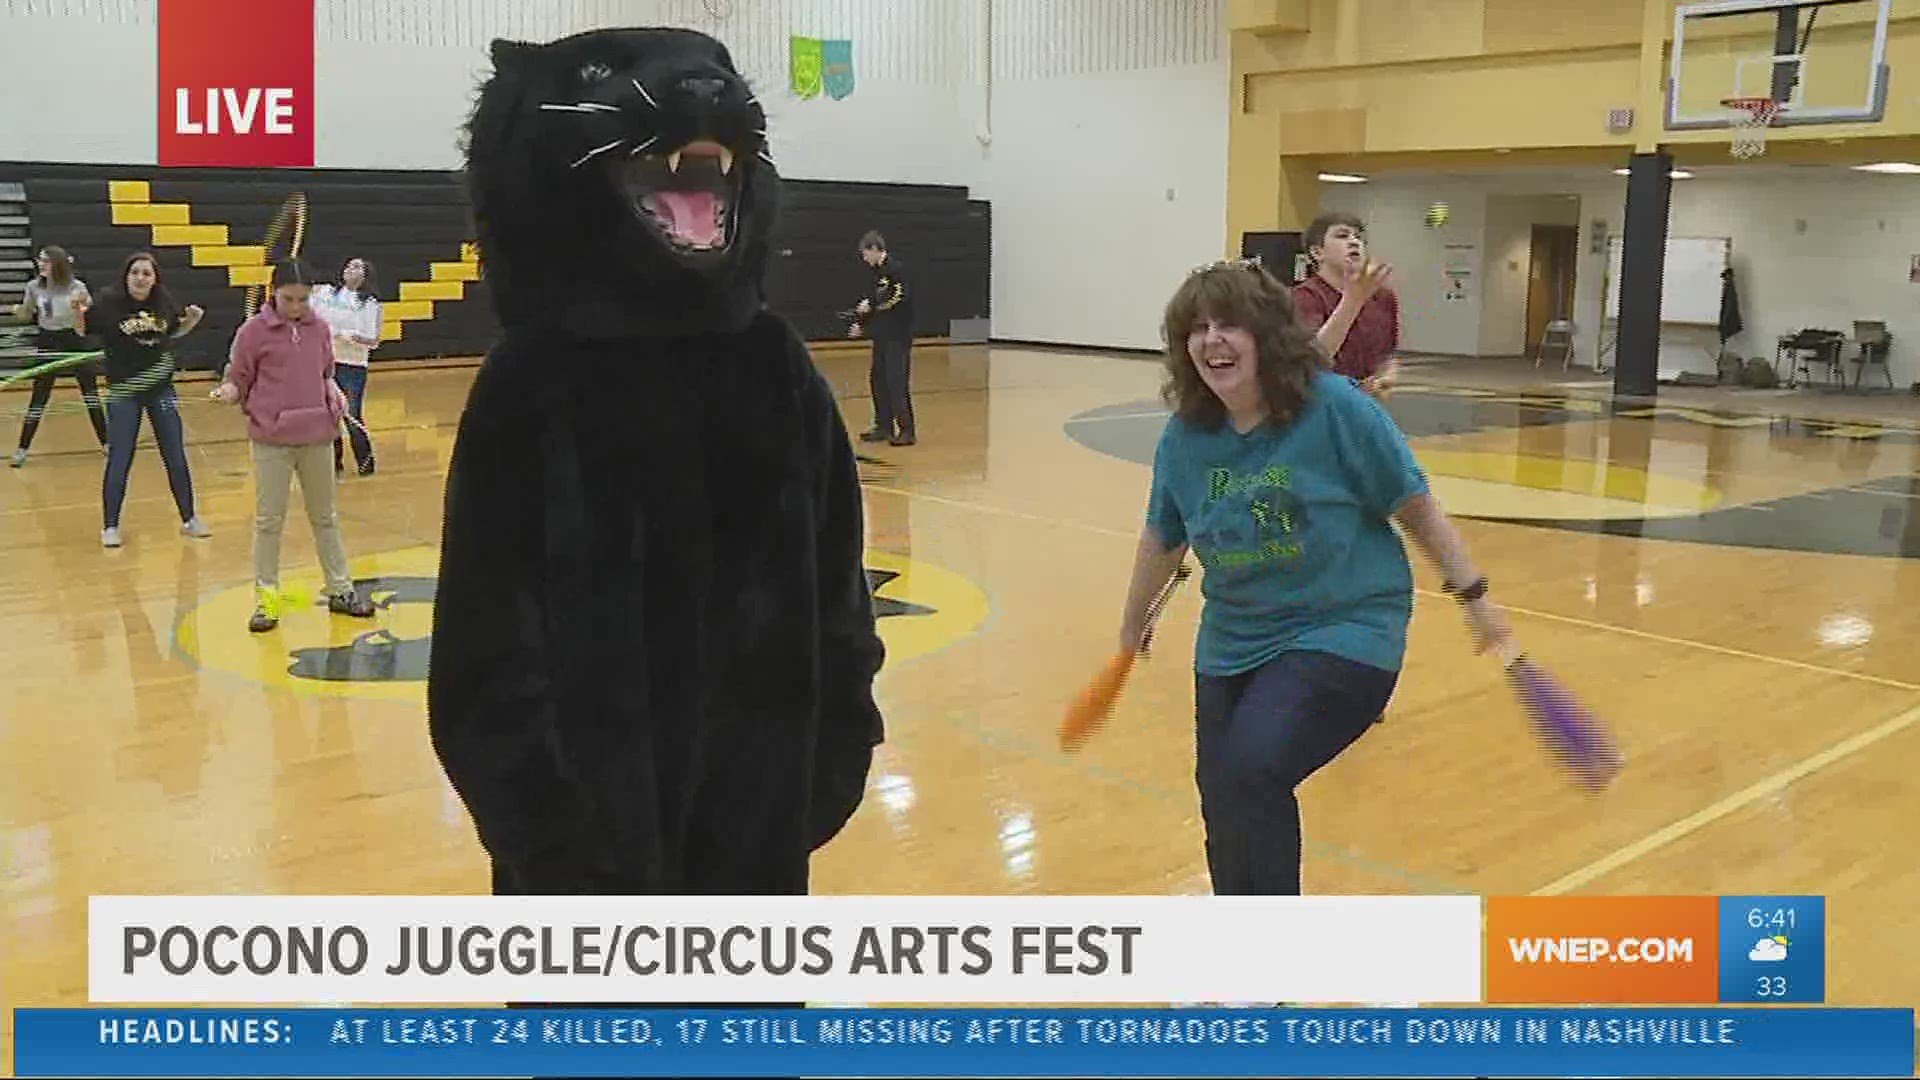 It's the three-day event where you can learn all sorts of circus tricks and tips.